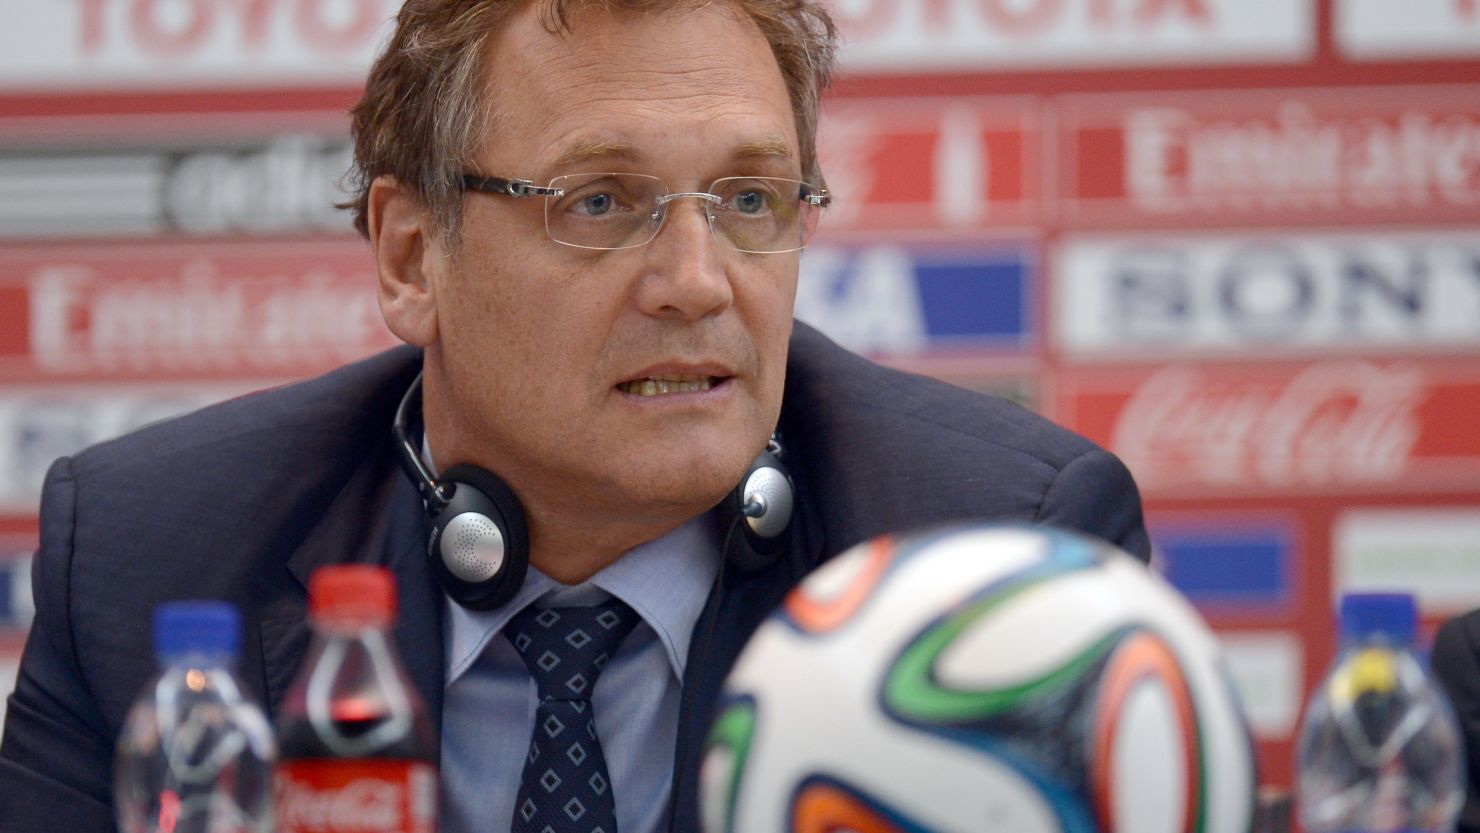 FIFA Secretary General Jerome Valcke was suspended until further notice